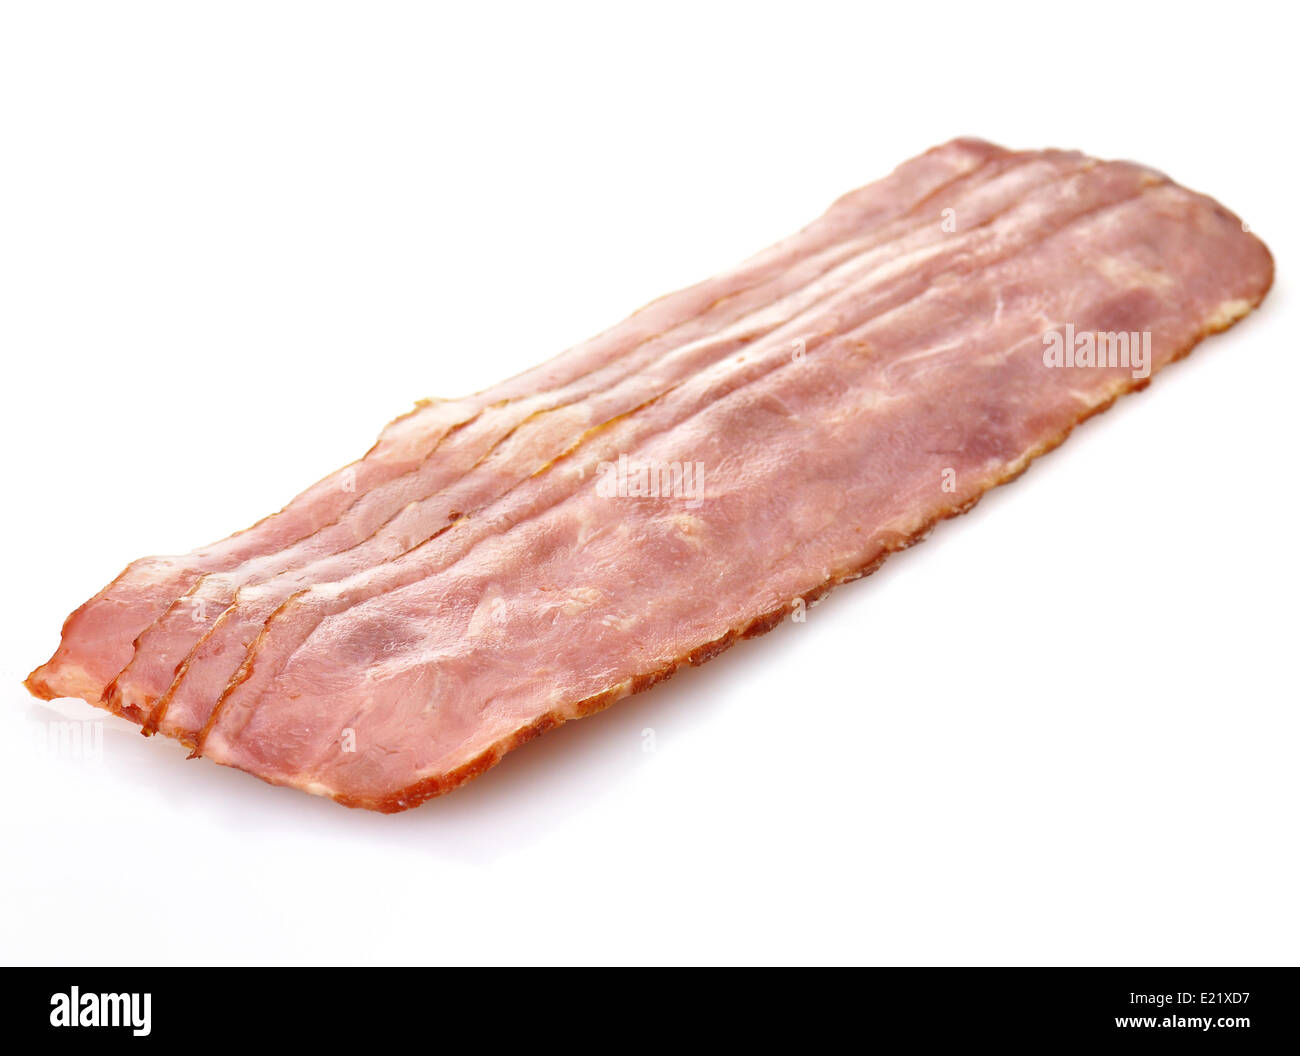 Turkey bacon bits Stock Vector Images - Alamy